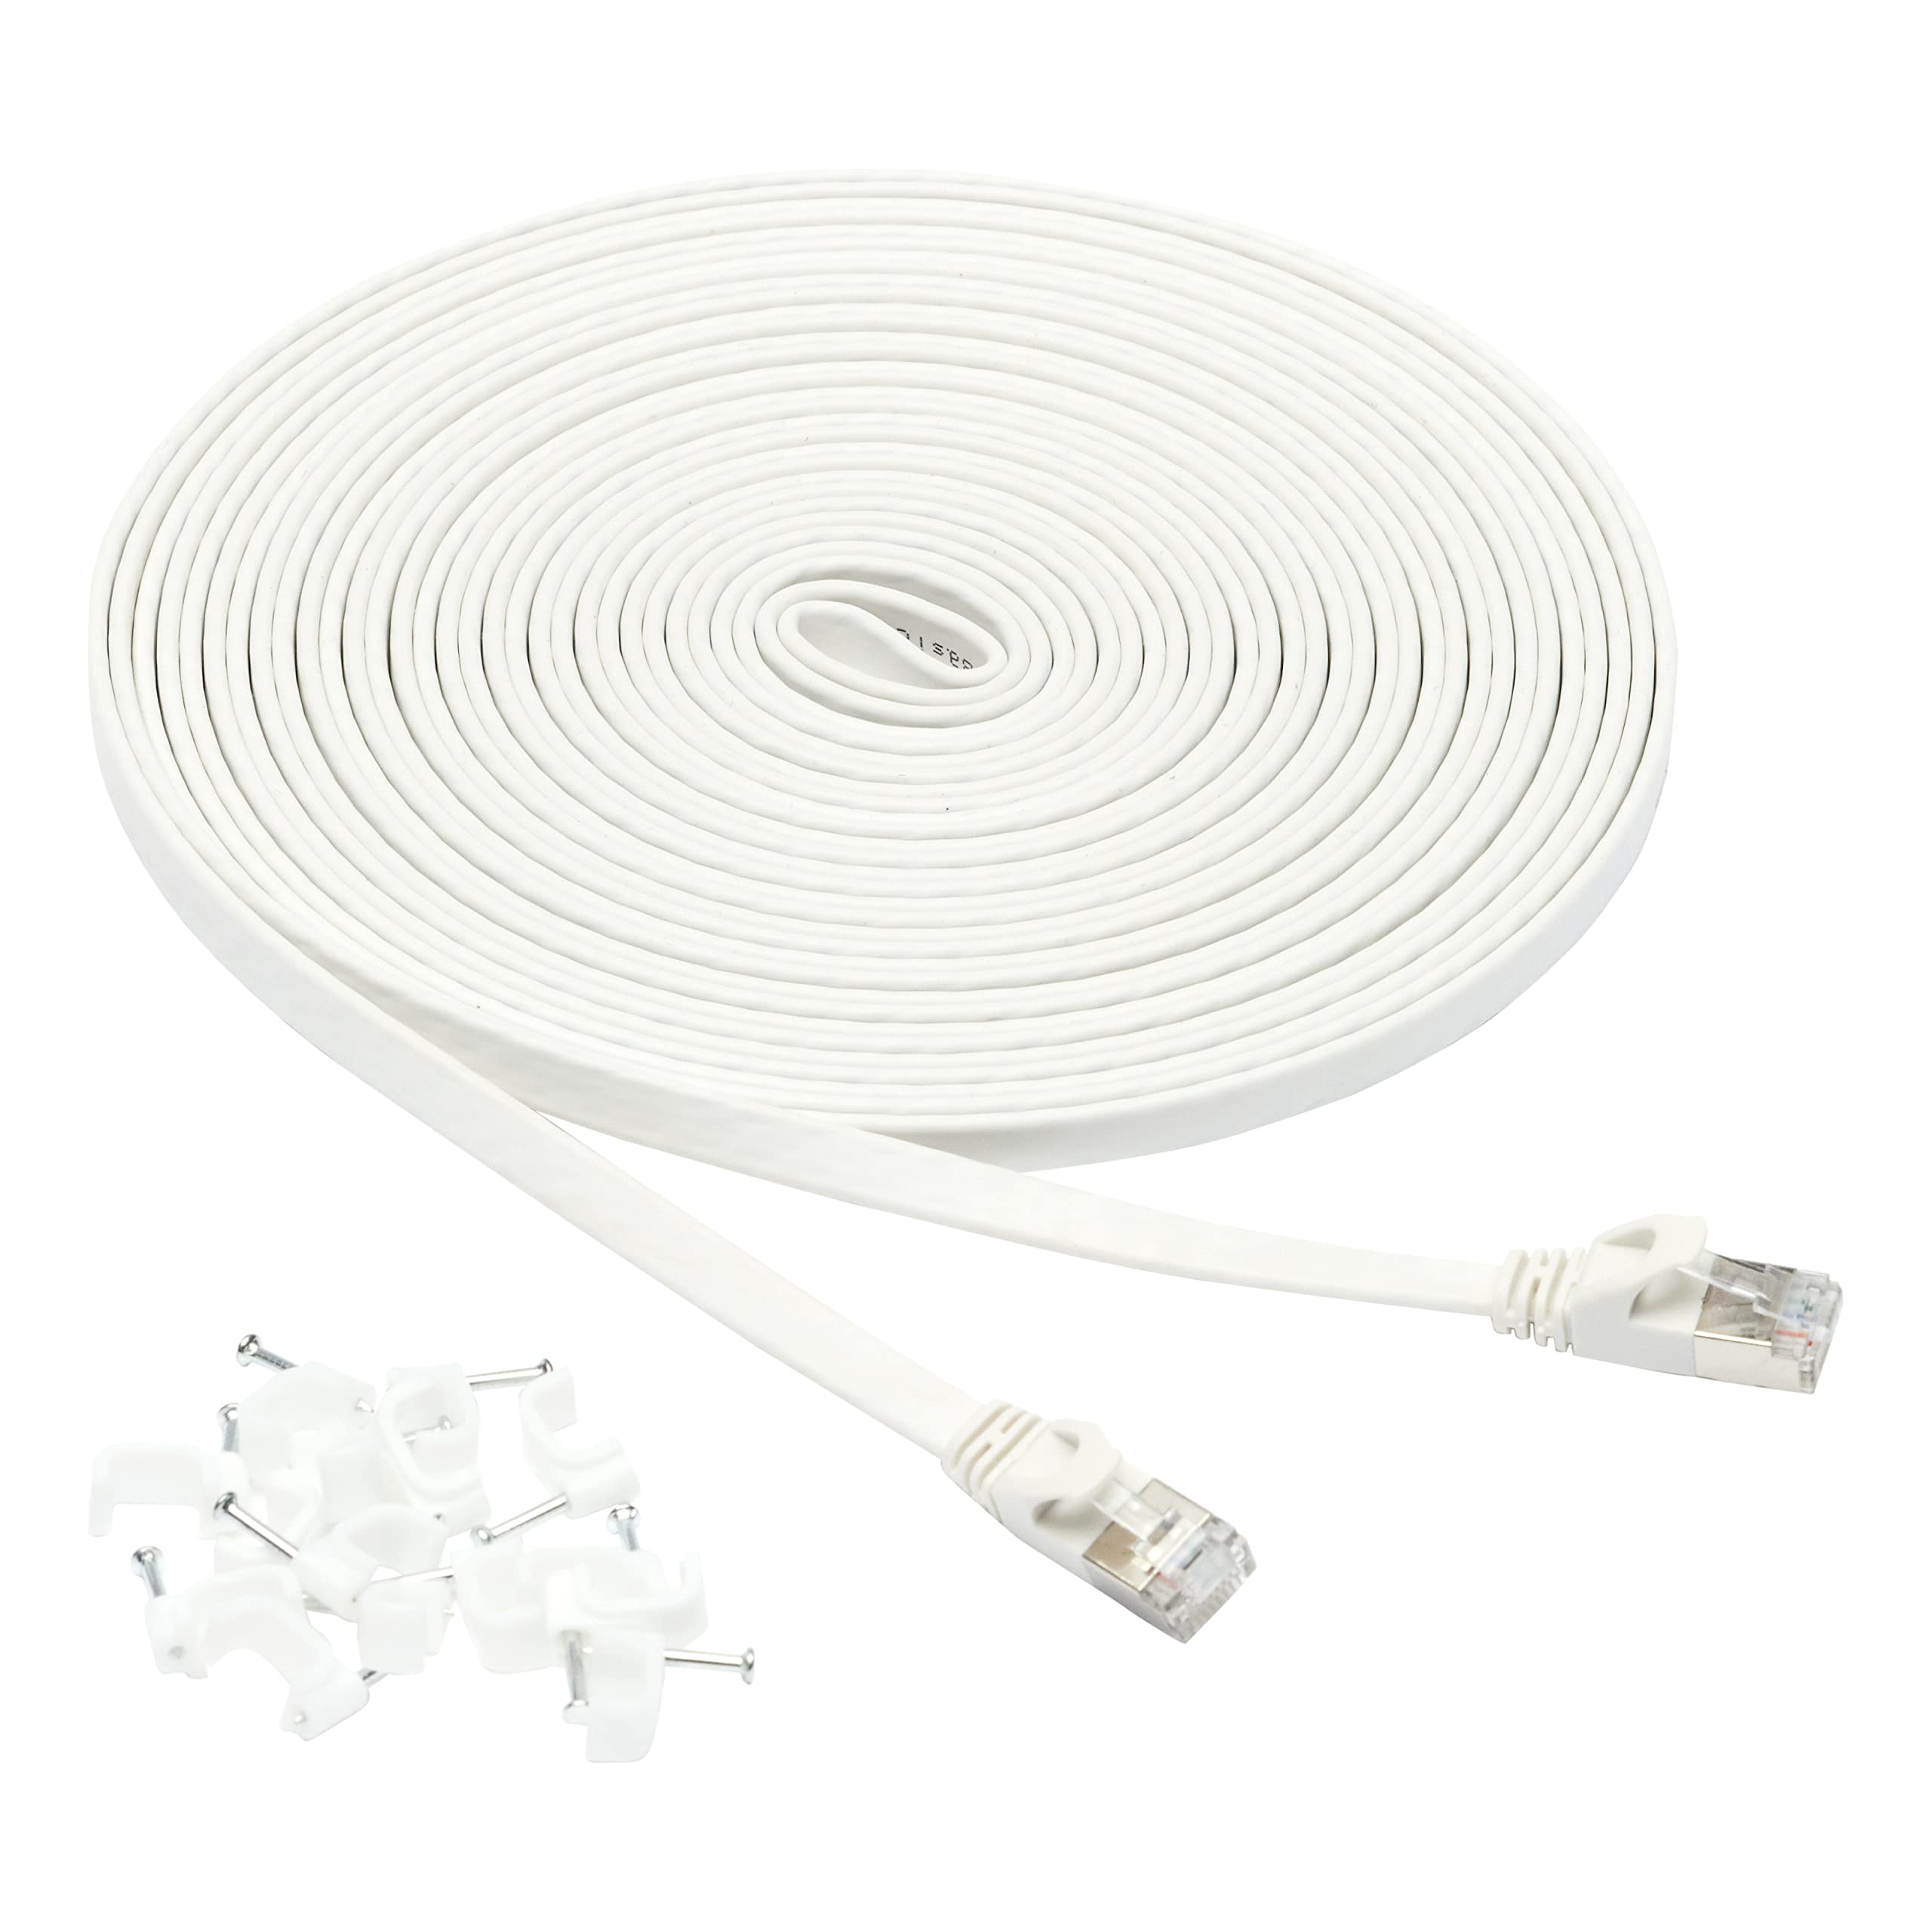 Amazon Basics Flat 30' RJ45 Cat 7 Ethernet Patch Cable,  600MHz, Snagless, Includes 15 Nails, 30 Foot, White $2.55